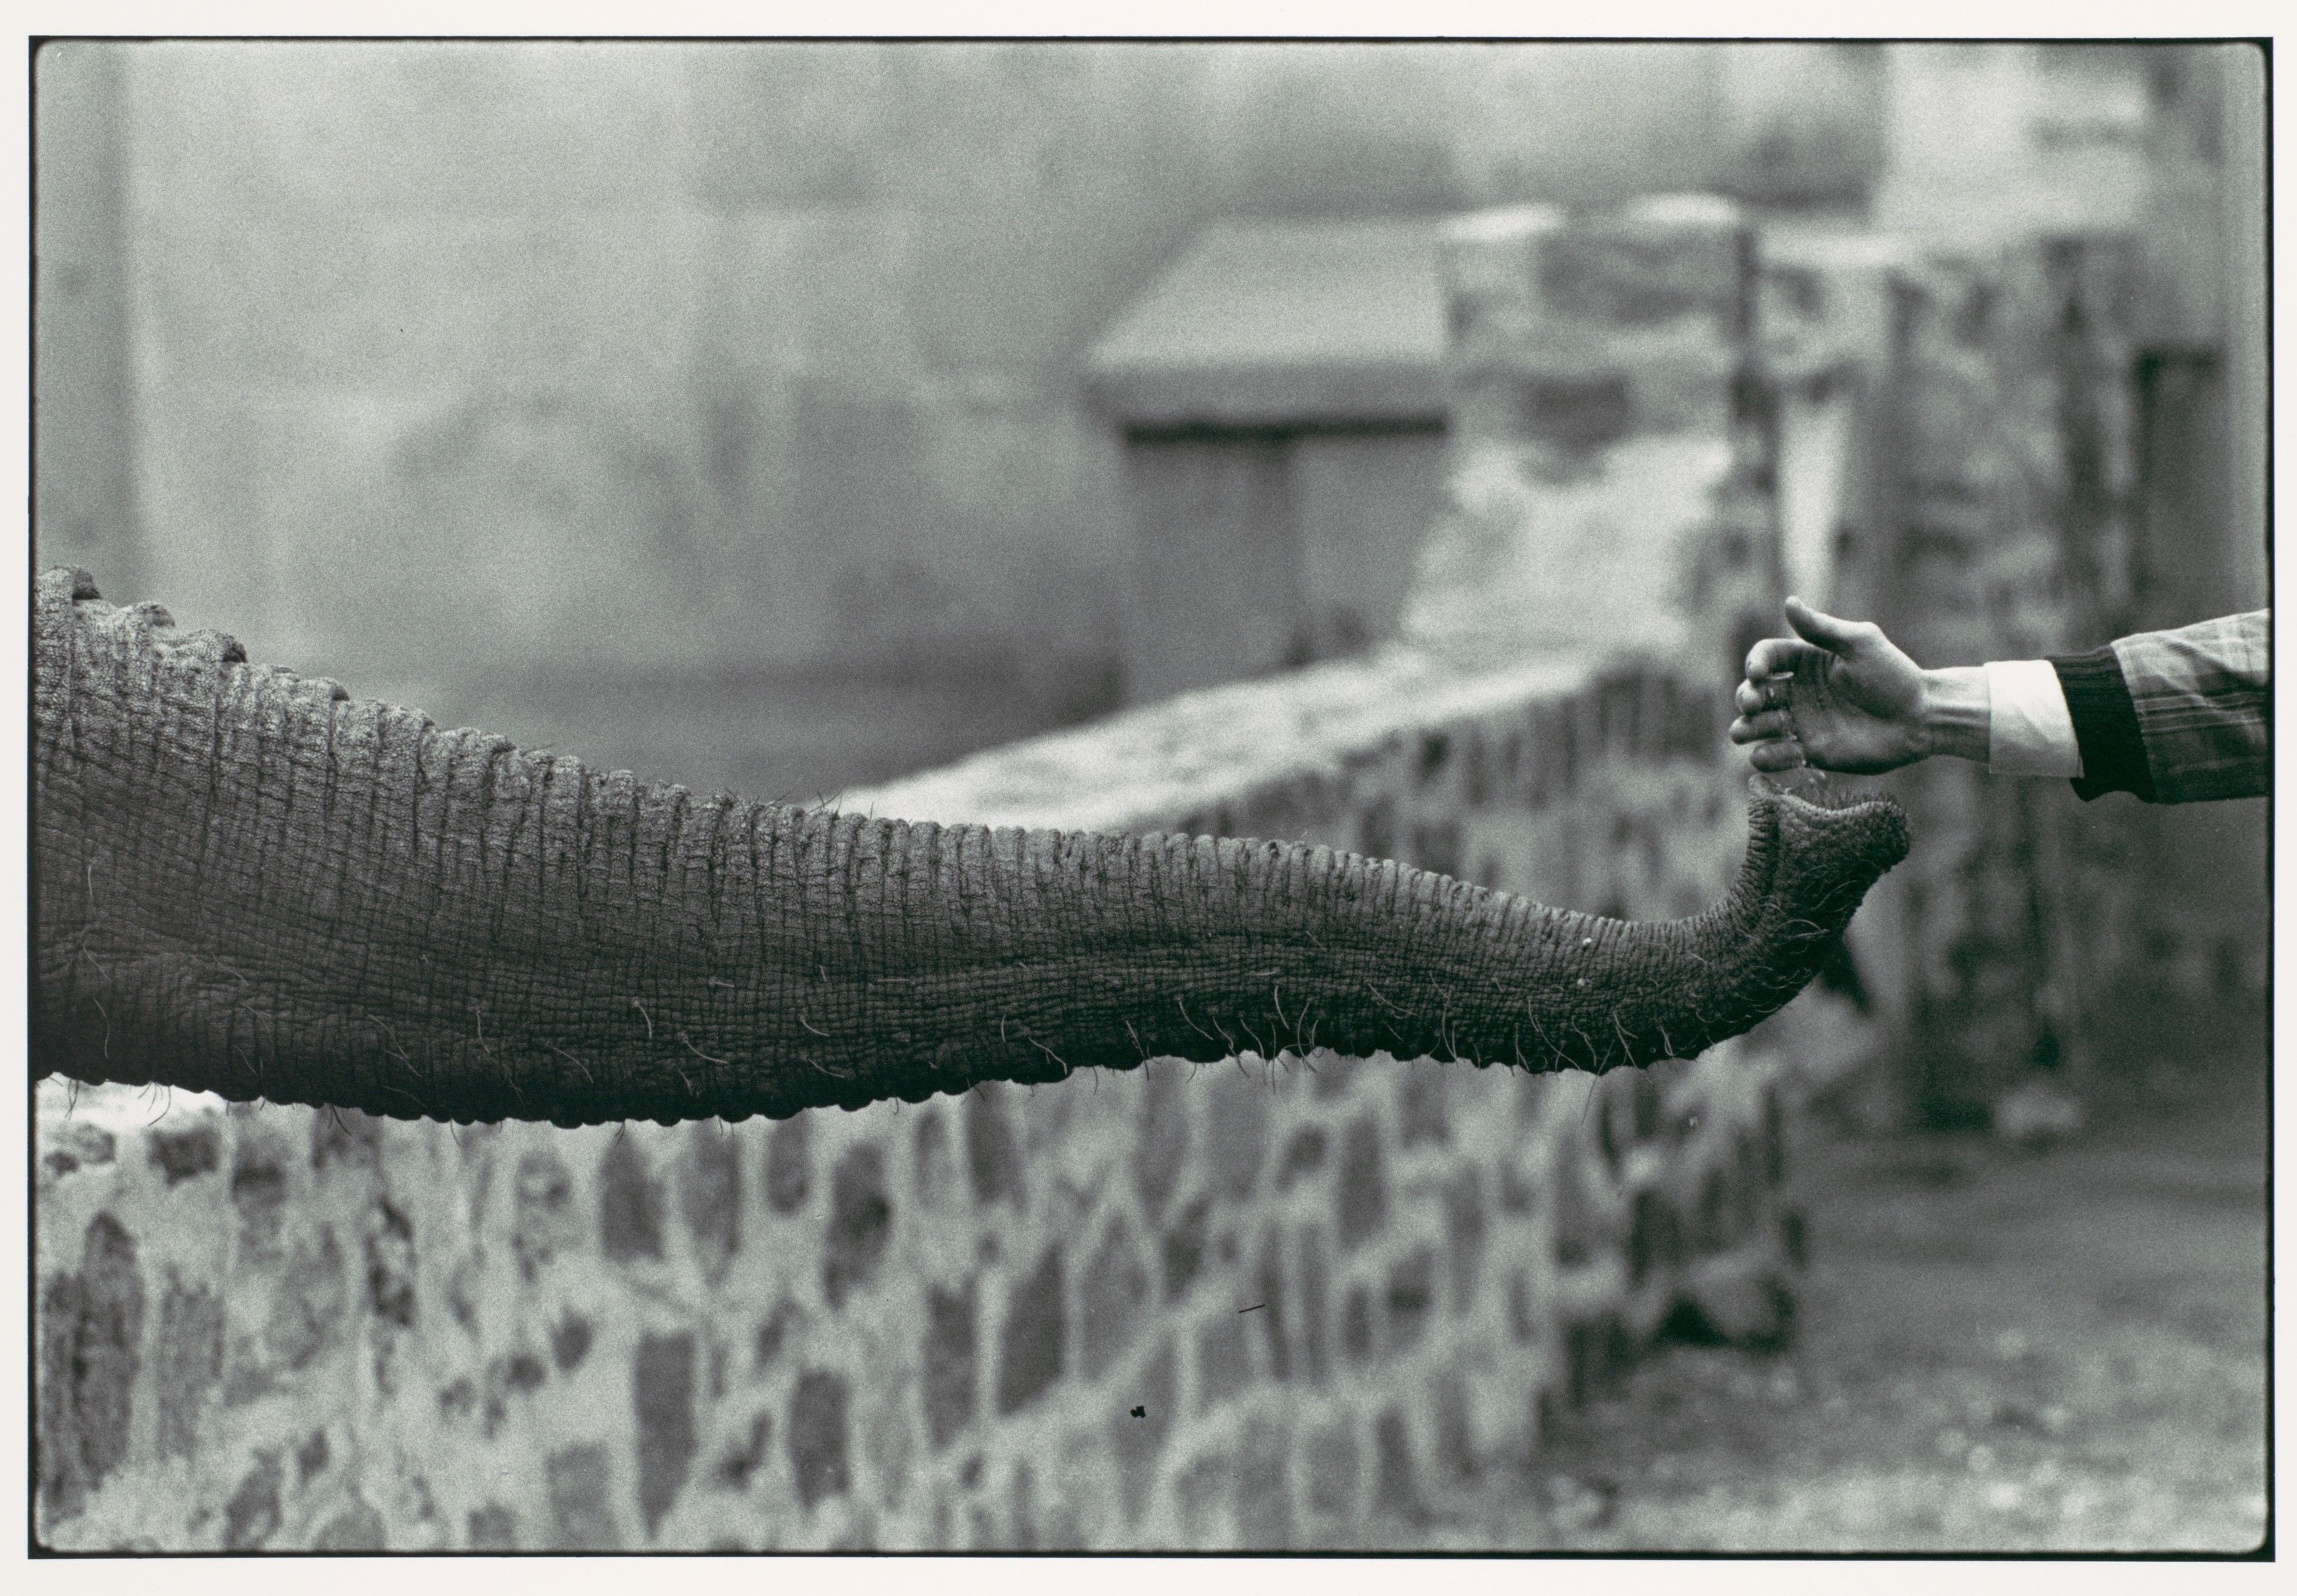 Watching 'The Most Dangerous Animals In The World' - The Bronx Zoo in 1963  - Flashbak